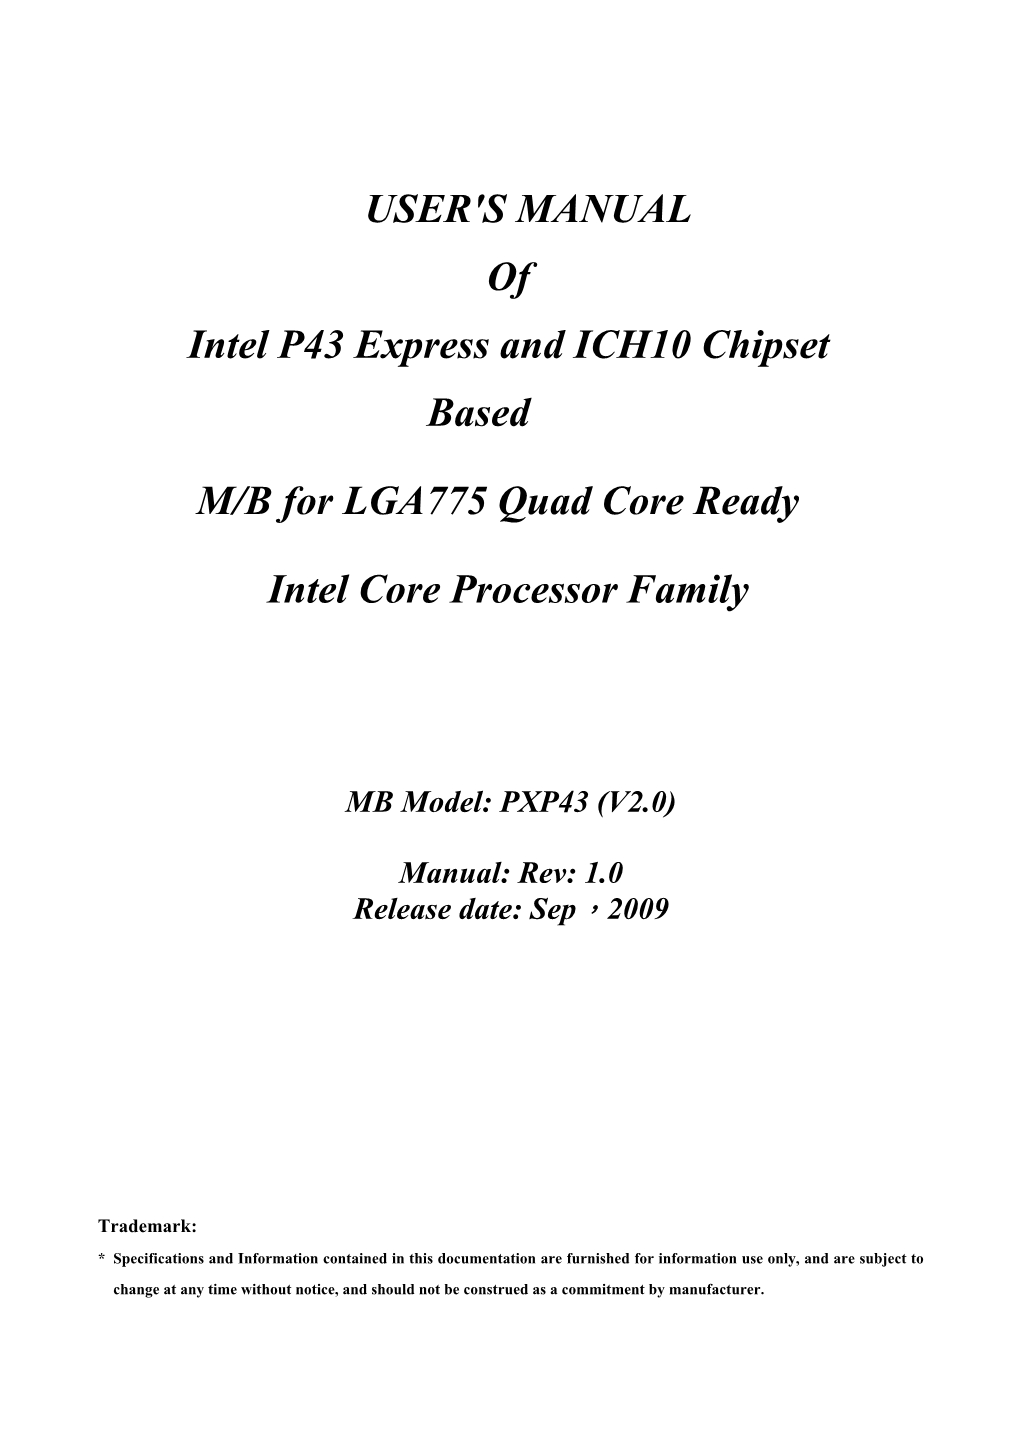 USER's MANUAL of Intel P43 Express and ICH10 Chipset Based